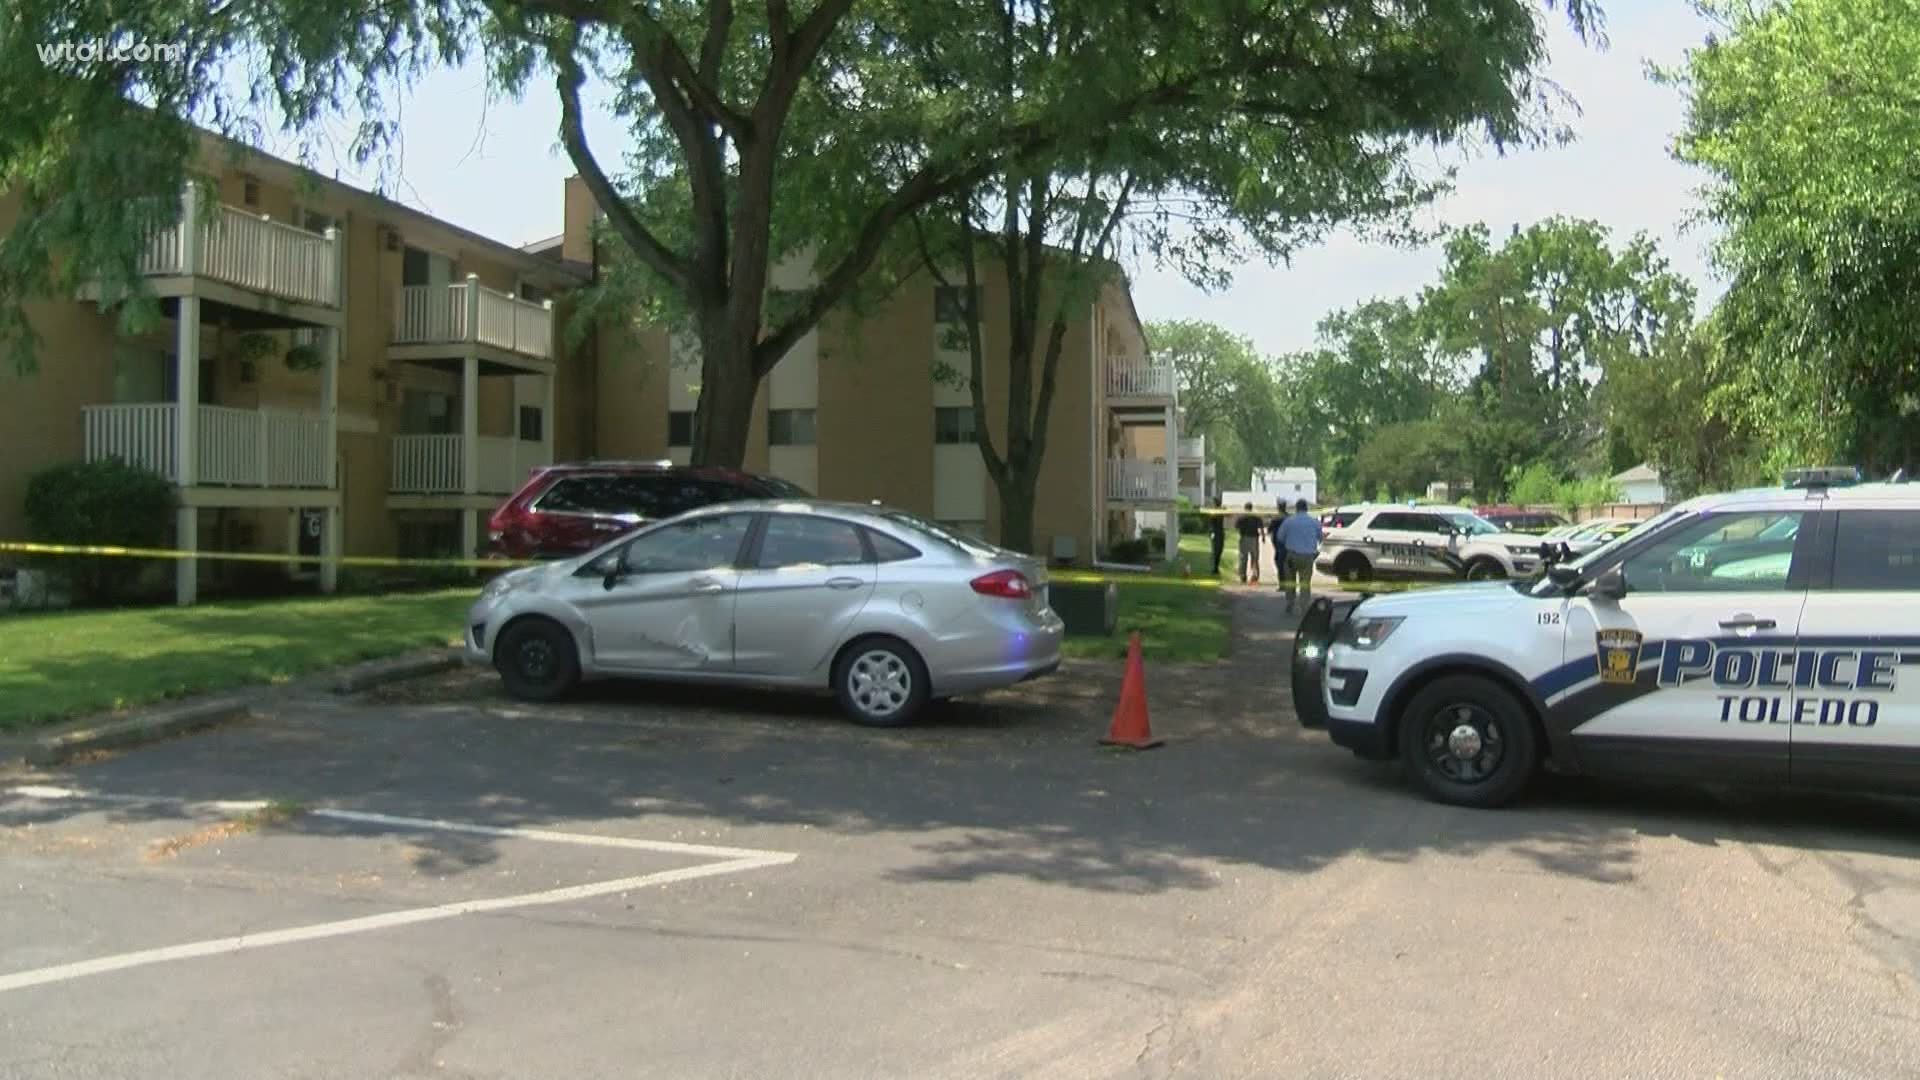 21-year-old Michael Patterson died from injuries after being shot at the Miracle Manor apartment complex just before 2 p.m. Friday.